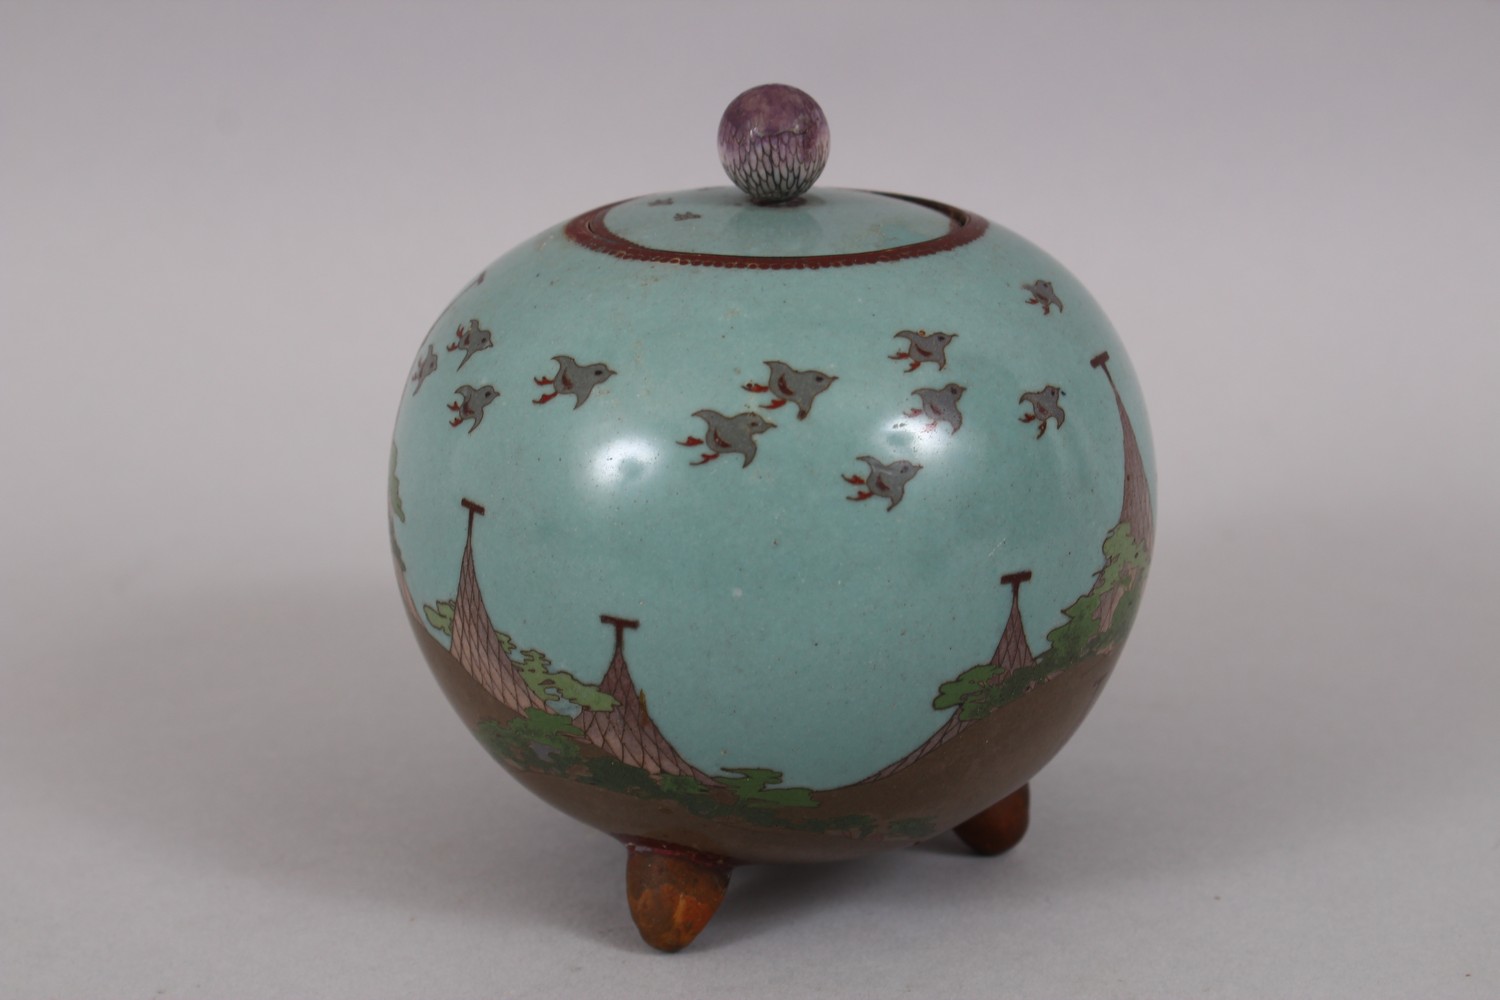 A GOOD JAPANESE MEIJI PERIOD GLOBULAR LIDDED CLOISONNE KORO, the body of the koro decorated with - Image 2 of 6